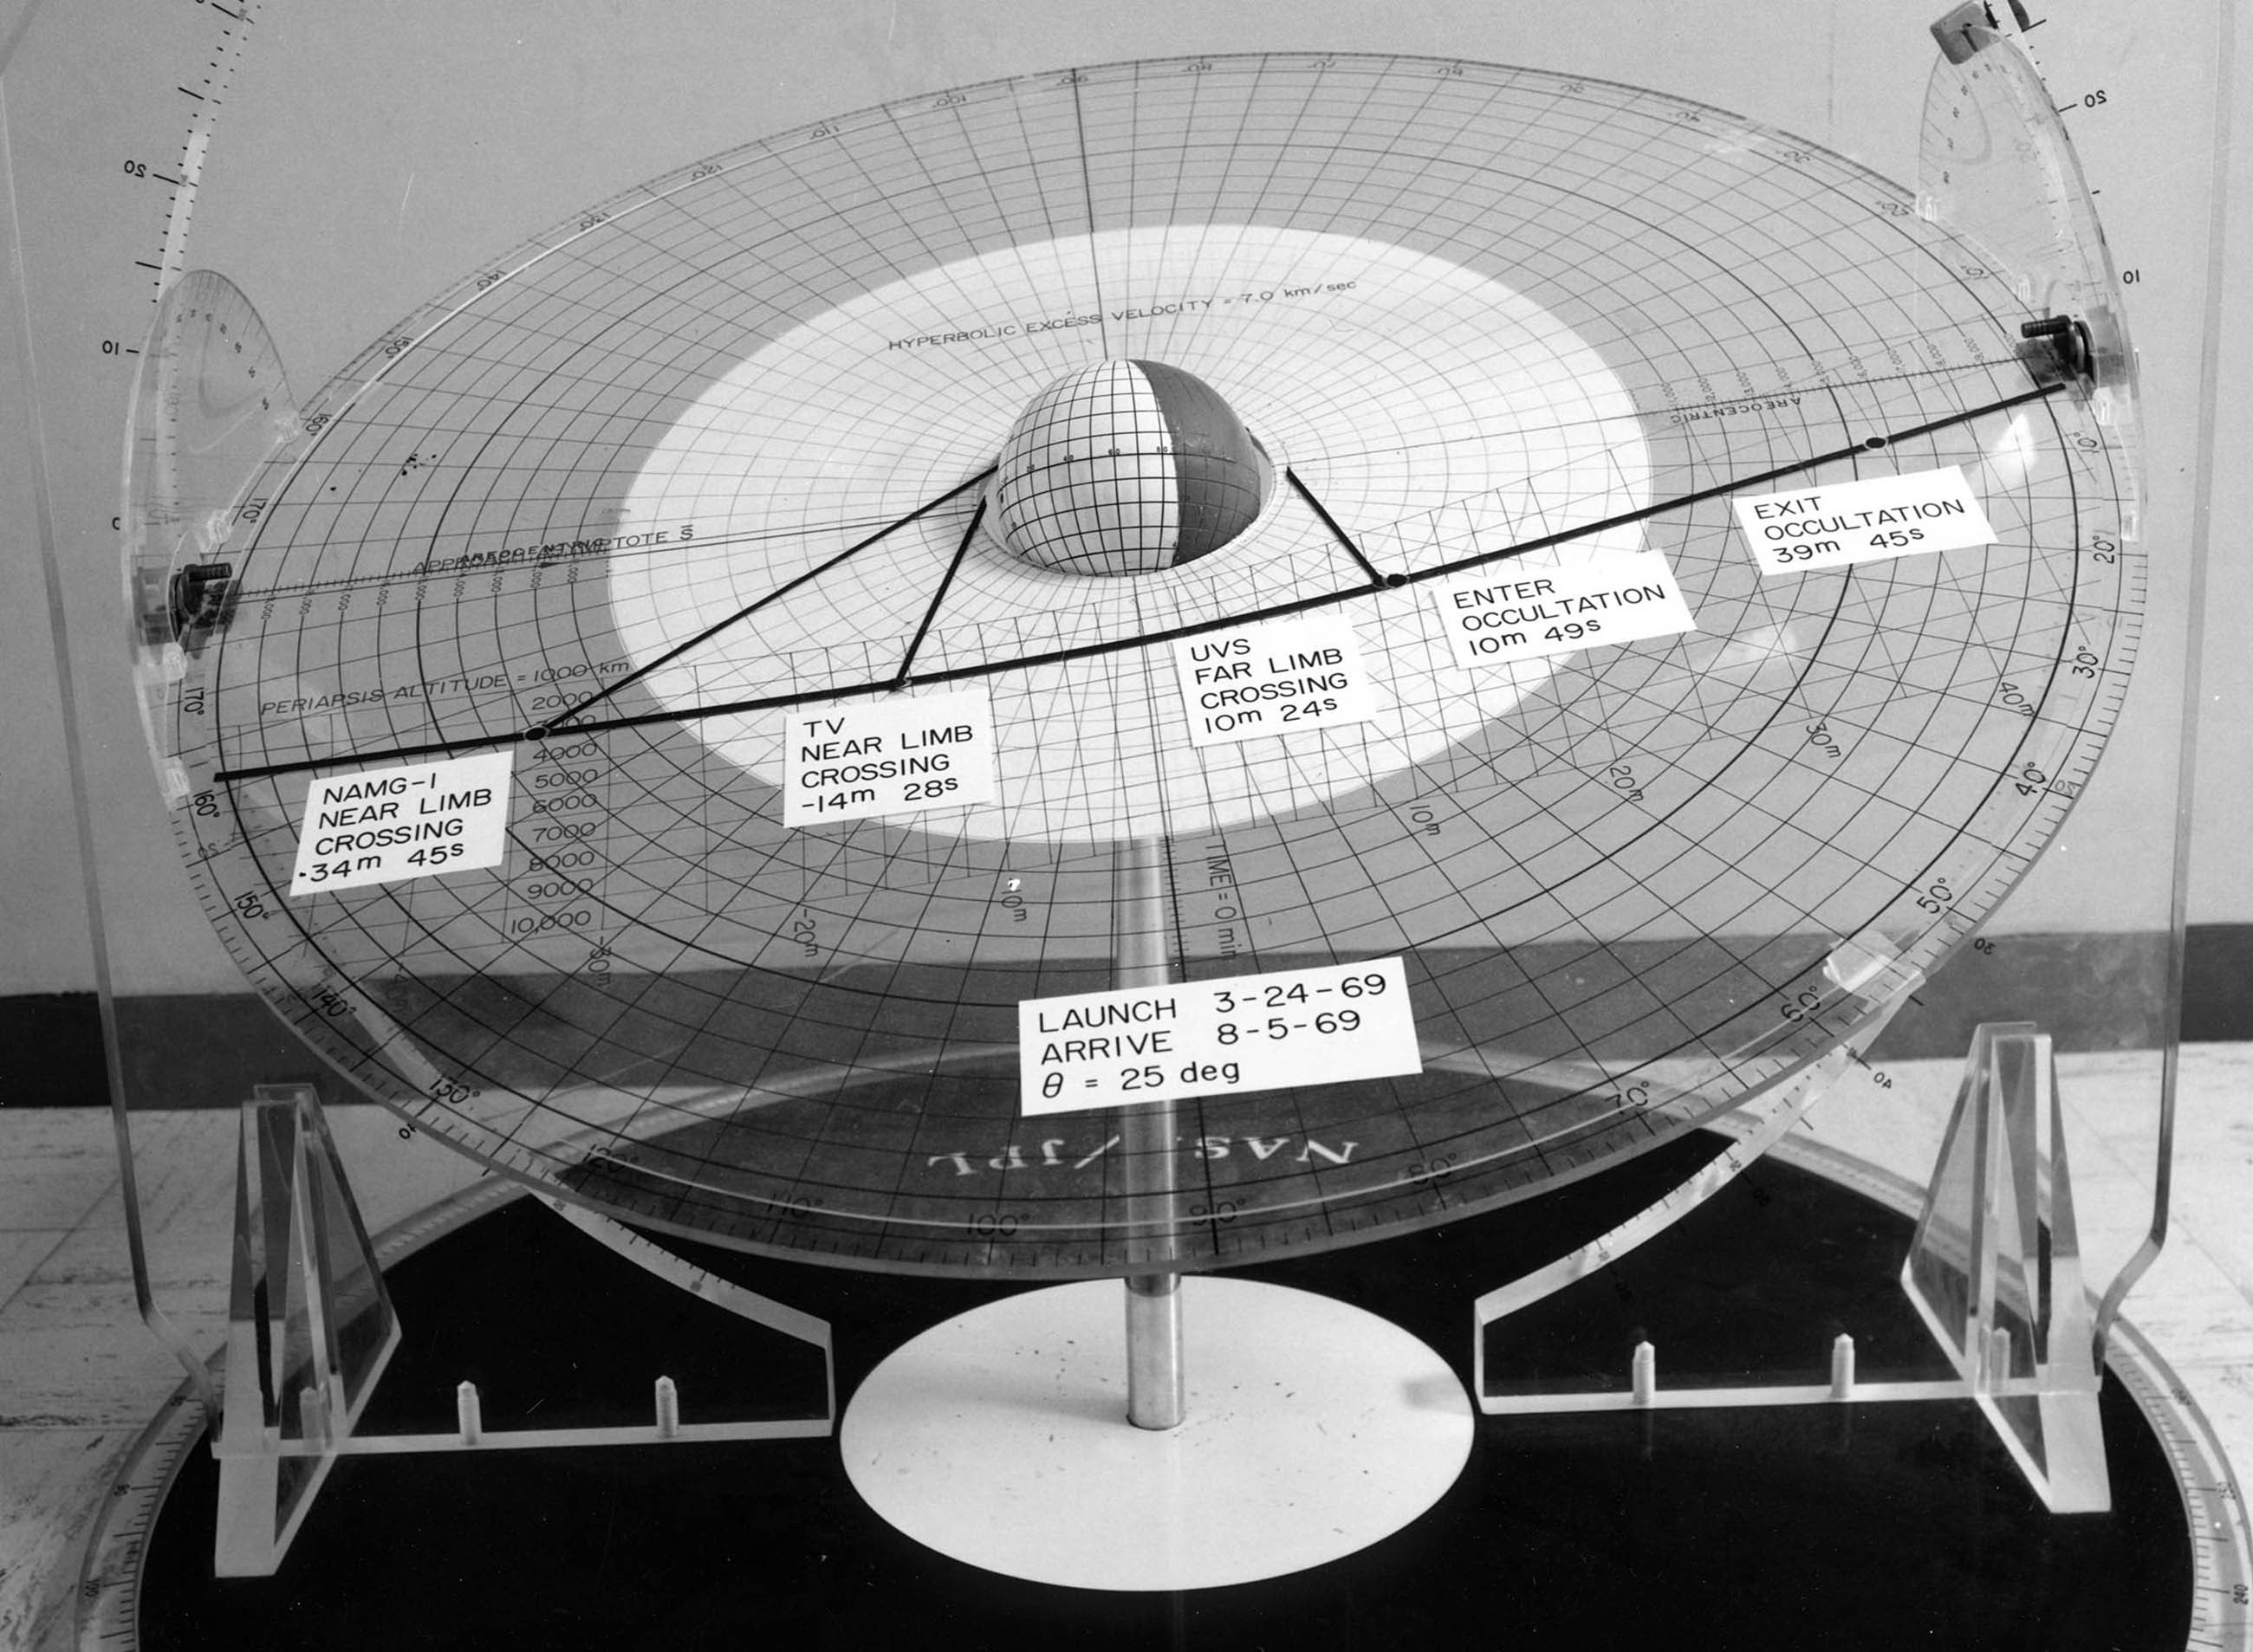 Mariner Mars ’69 flyby model used in displaying the Mariner 6 and 7 encounters with the red planet. Credit: Charles Kohlhase